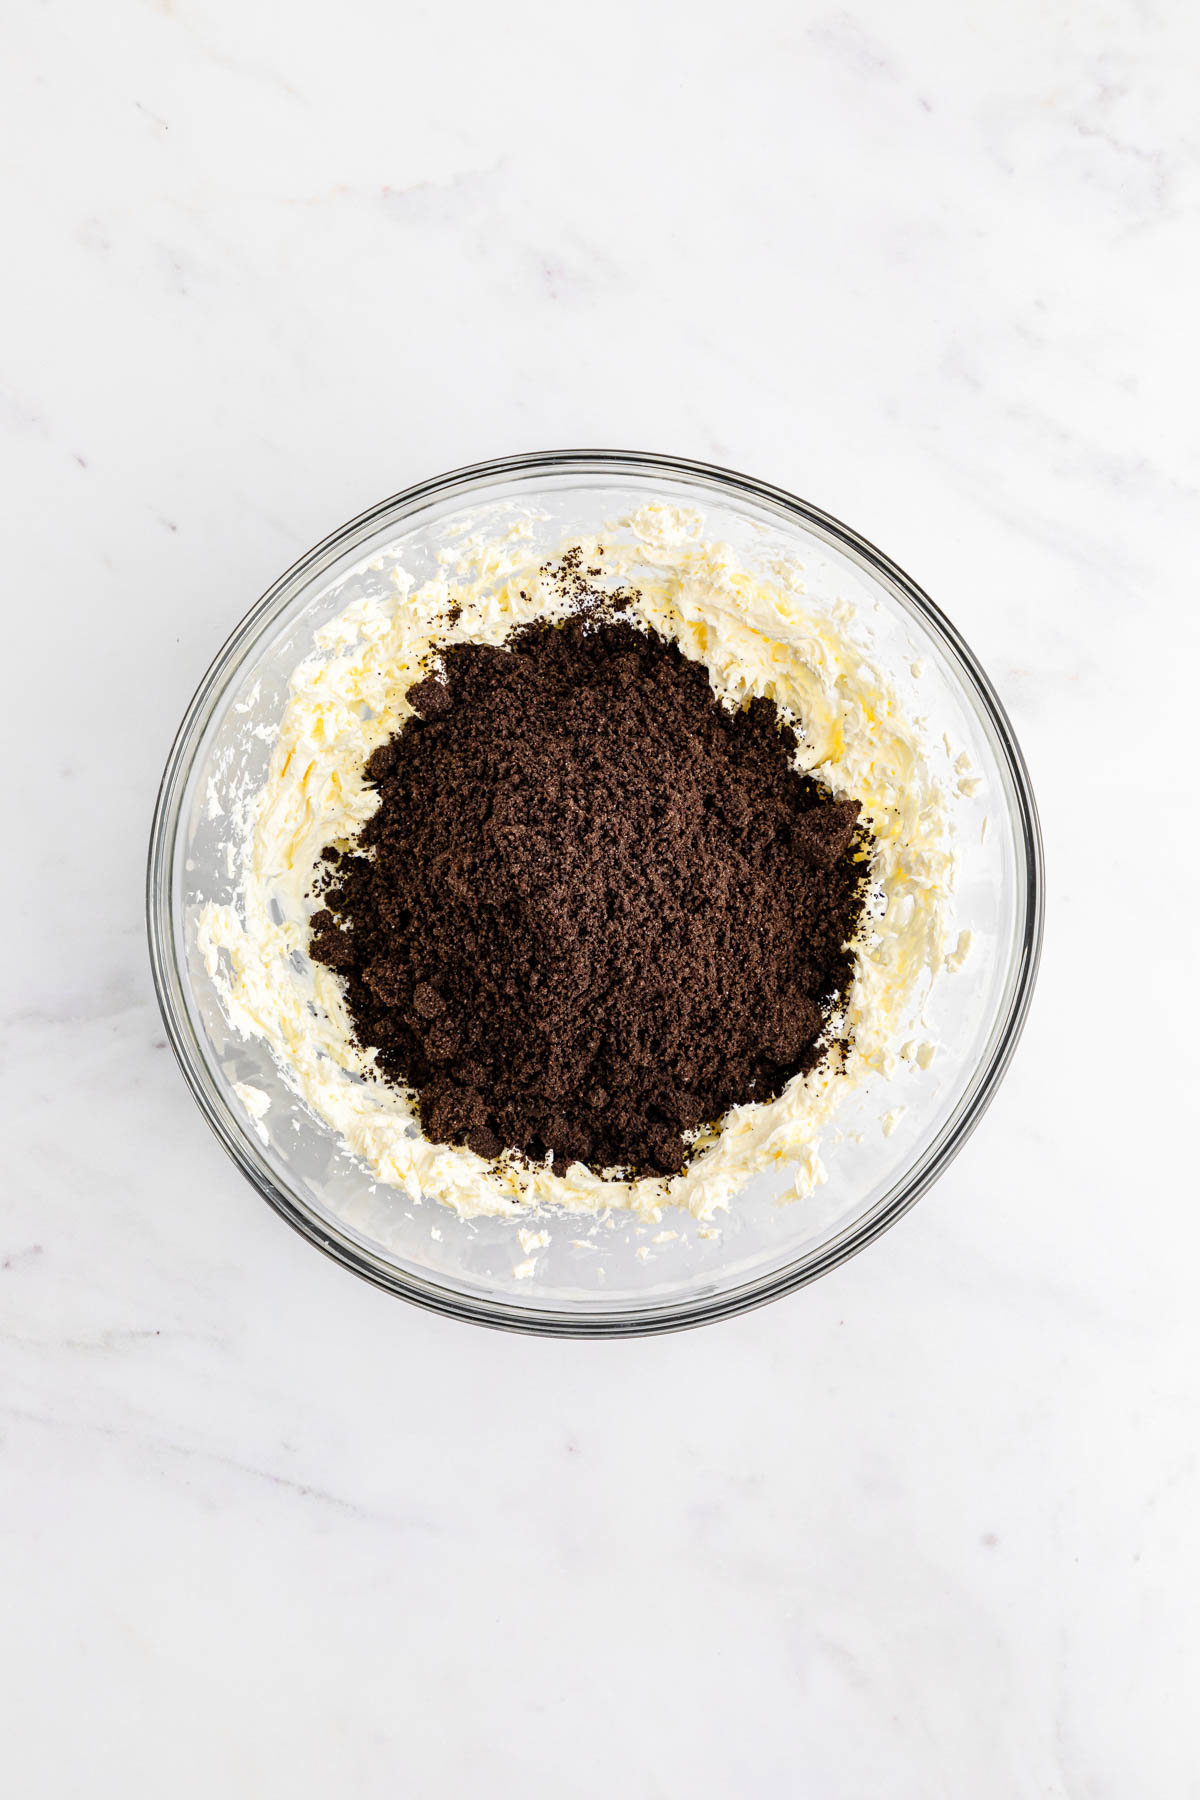 A glass bowl filled with a mixture of cream cheese and Oreo crumbs